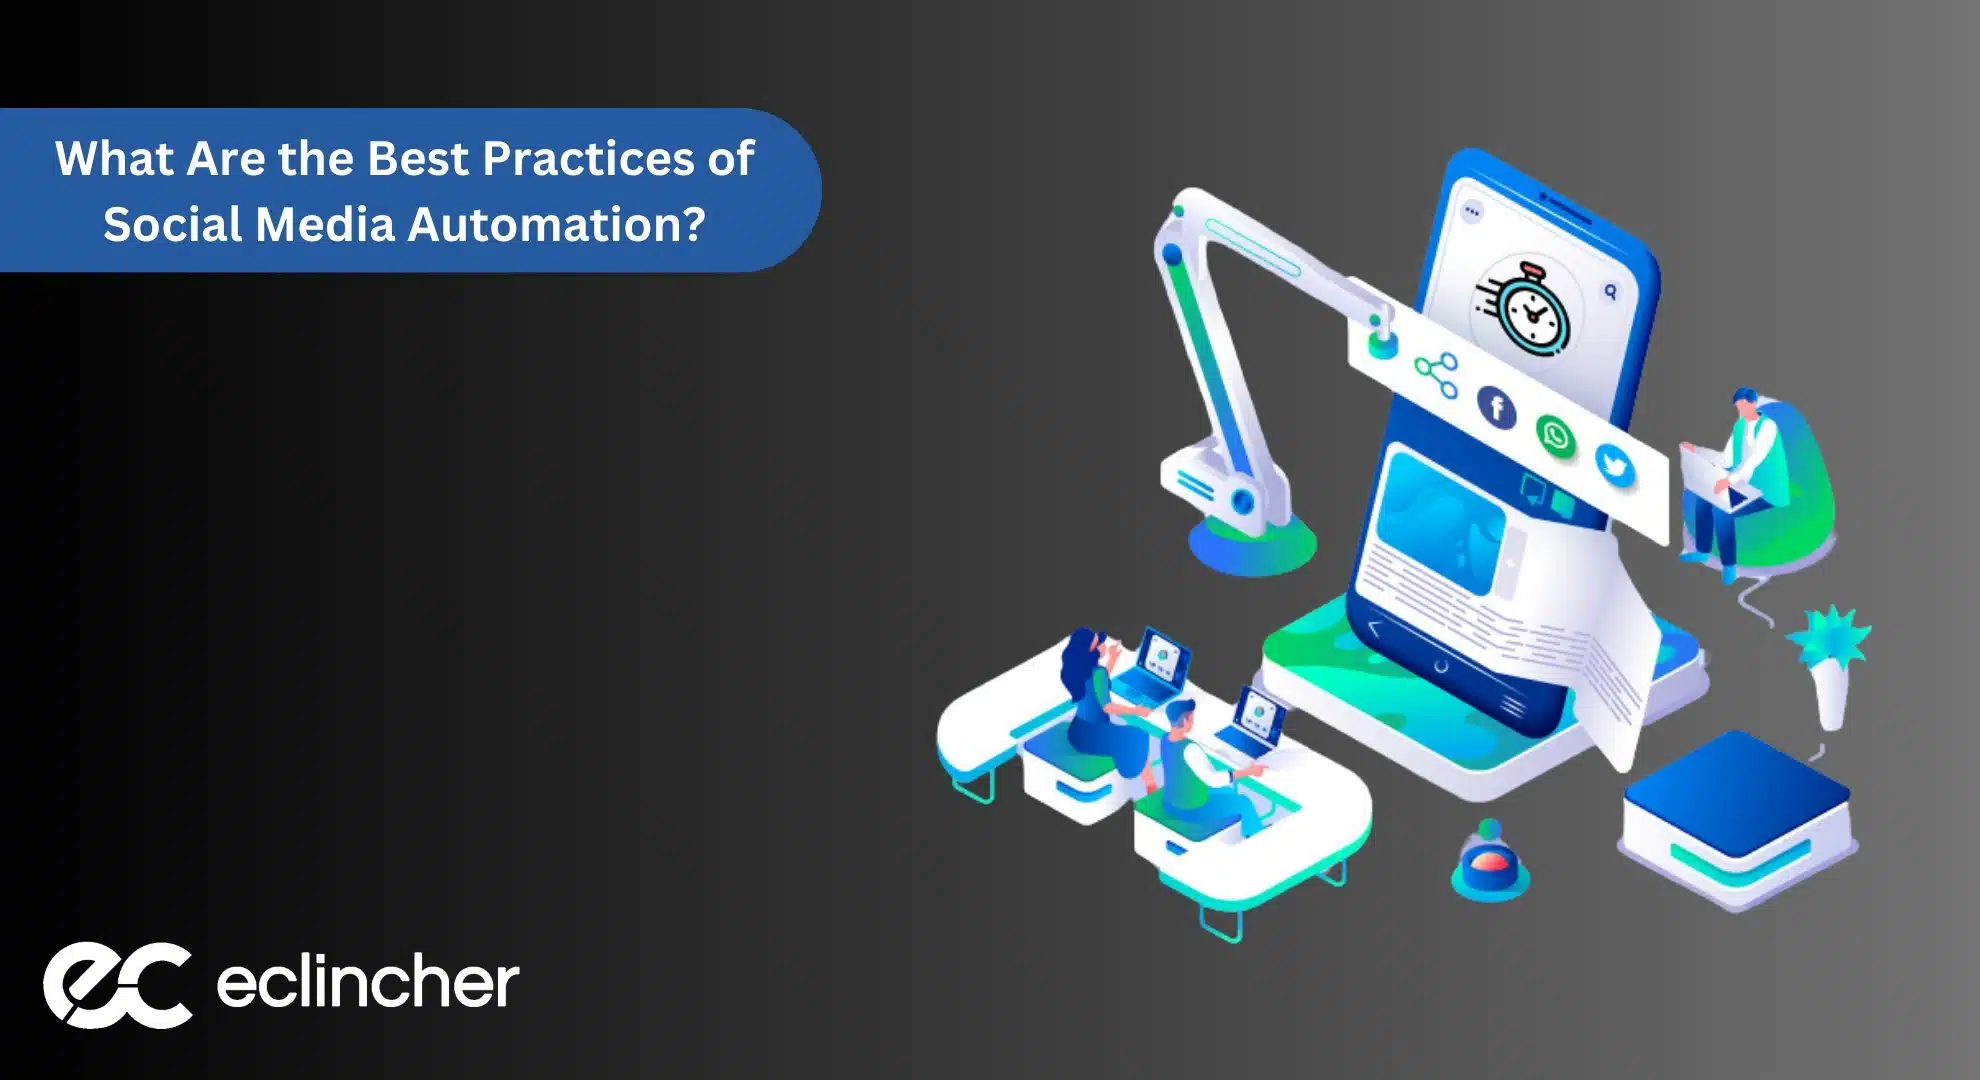 What Are the Best Practices of Social Media Automation